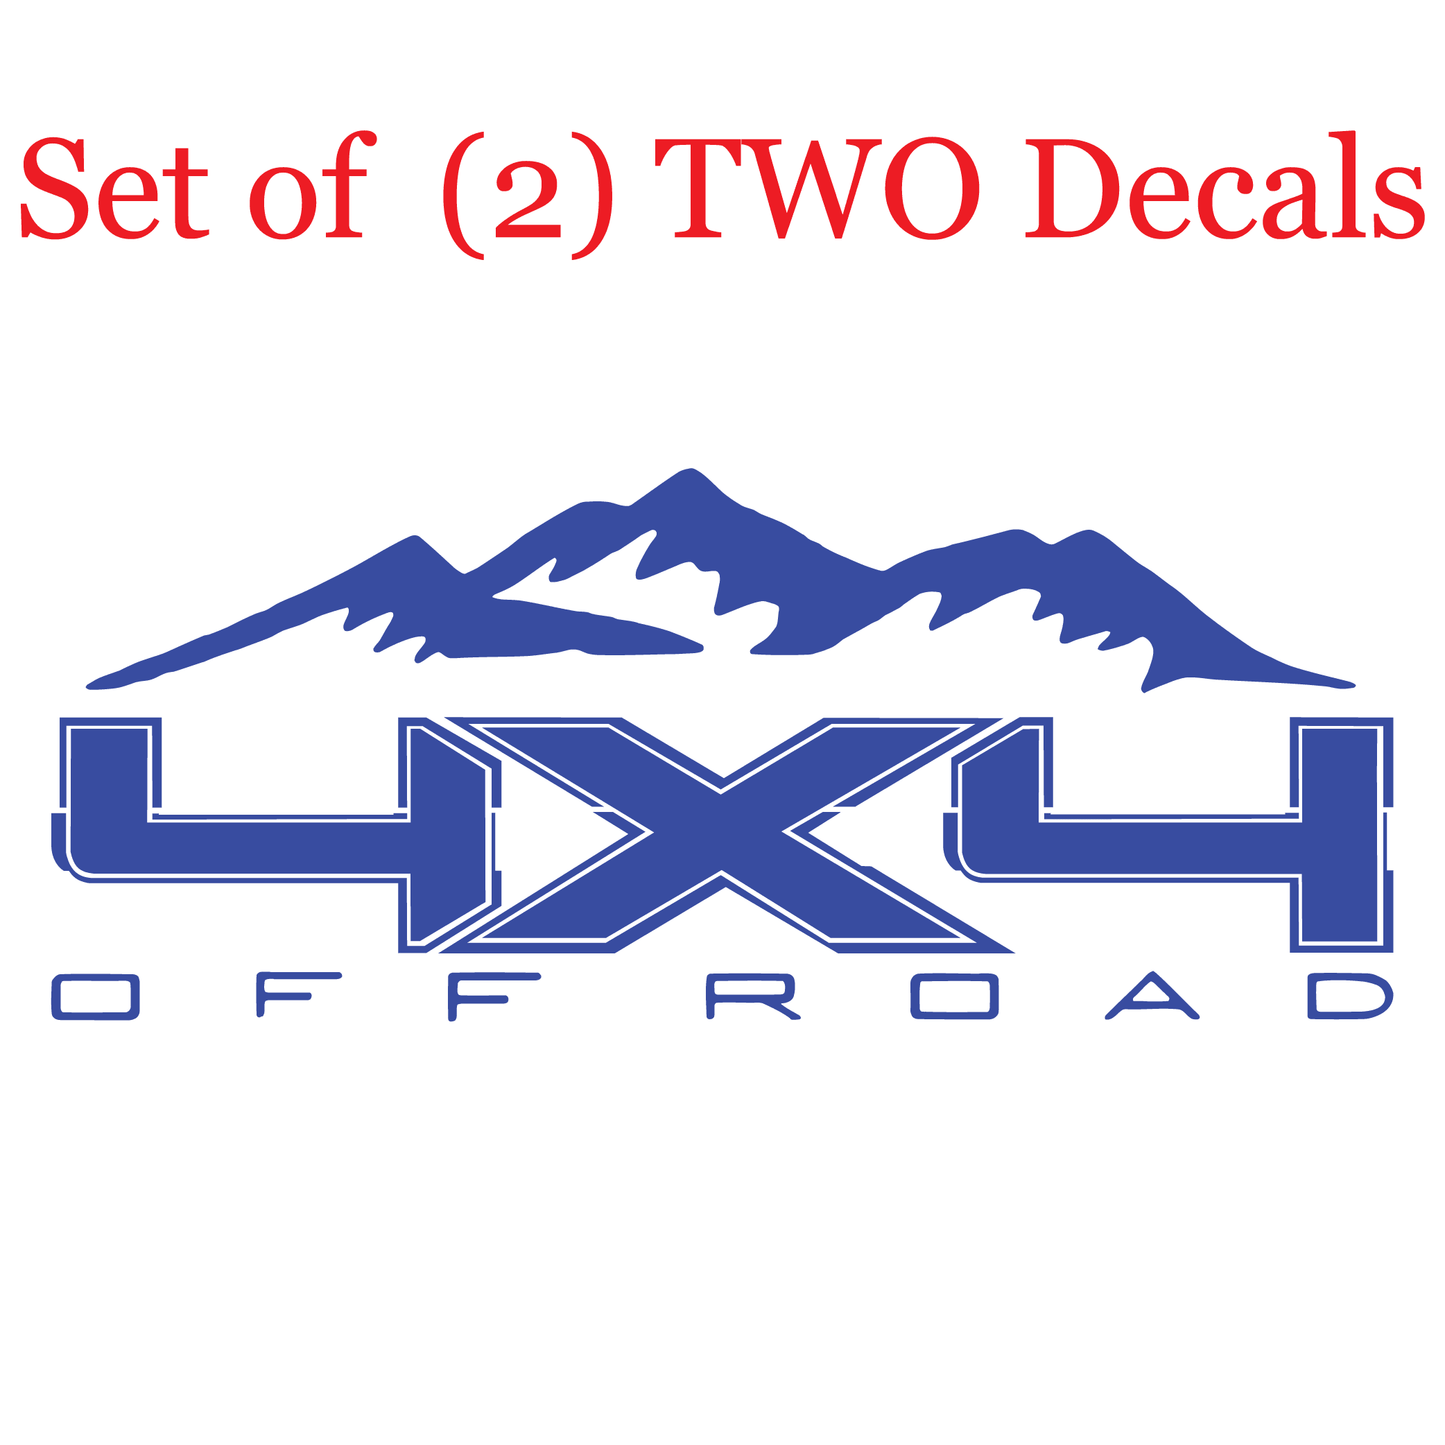 Shop Vinyl Design F-150 F-250 Trucks Replacement Bedside Decals Mountain 4 x 4 Off Road #09 Vehicle decal 001 Brilliant Blue Gloss Shop Vinyl Design decals stickers